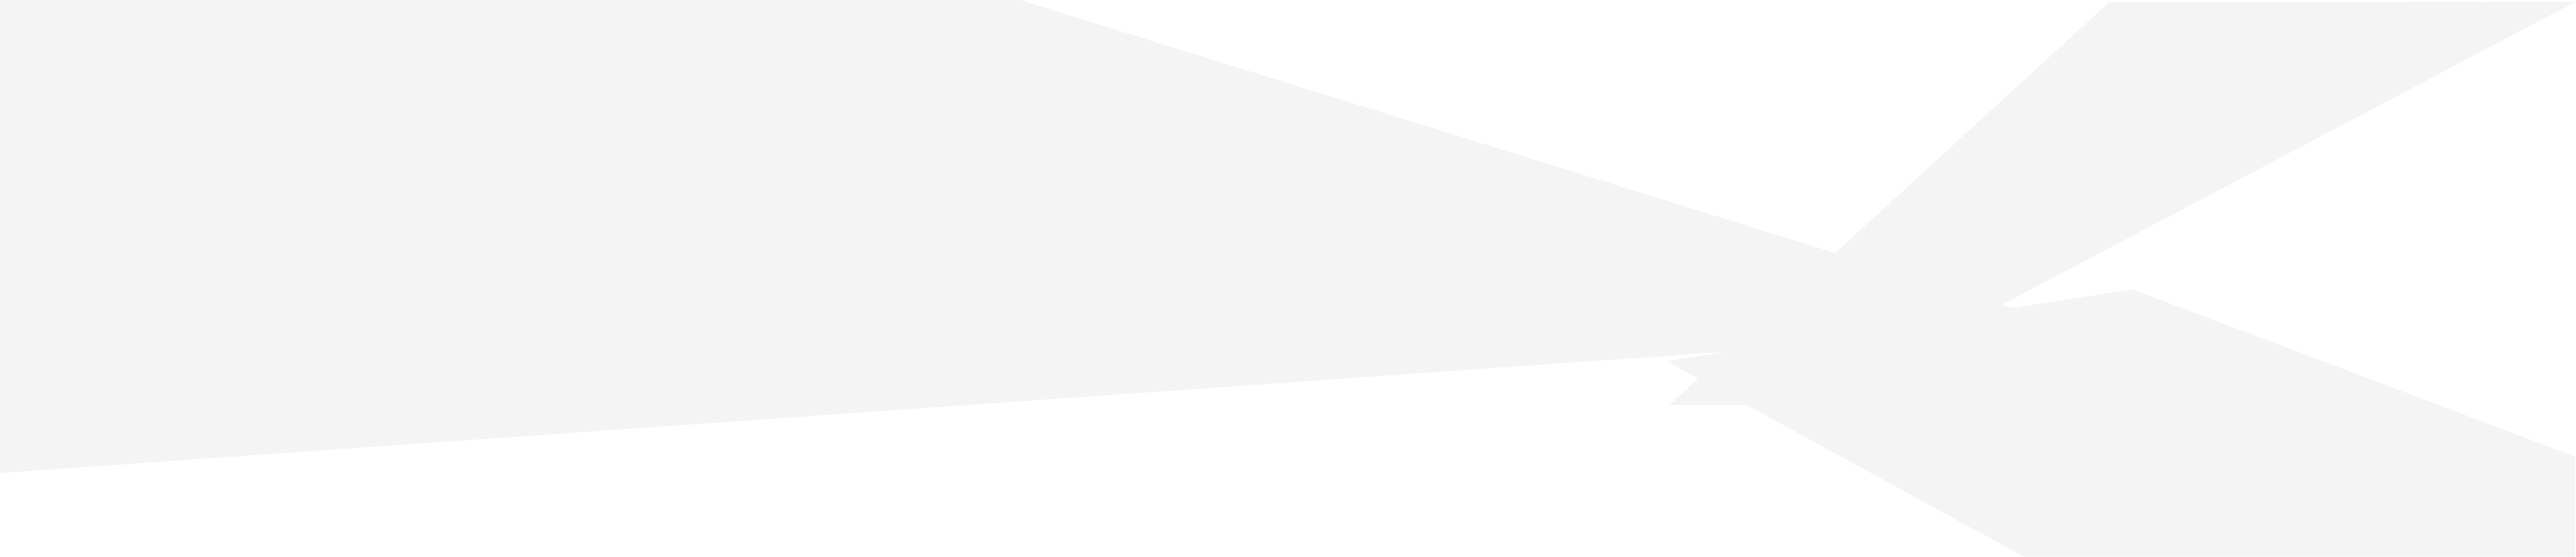 a gray arrow pointing to the right on a black background